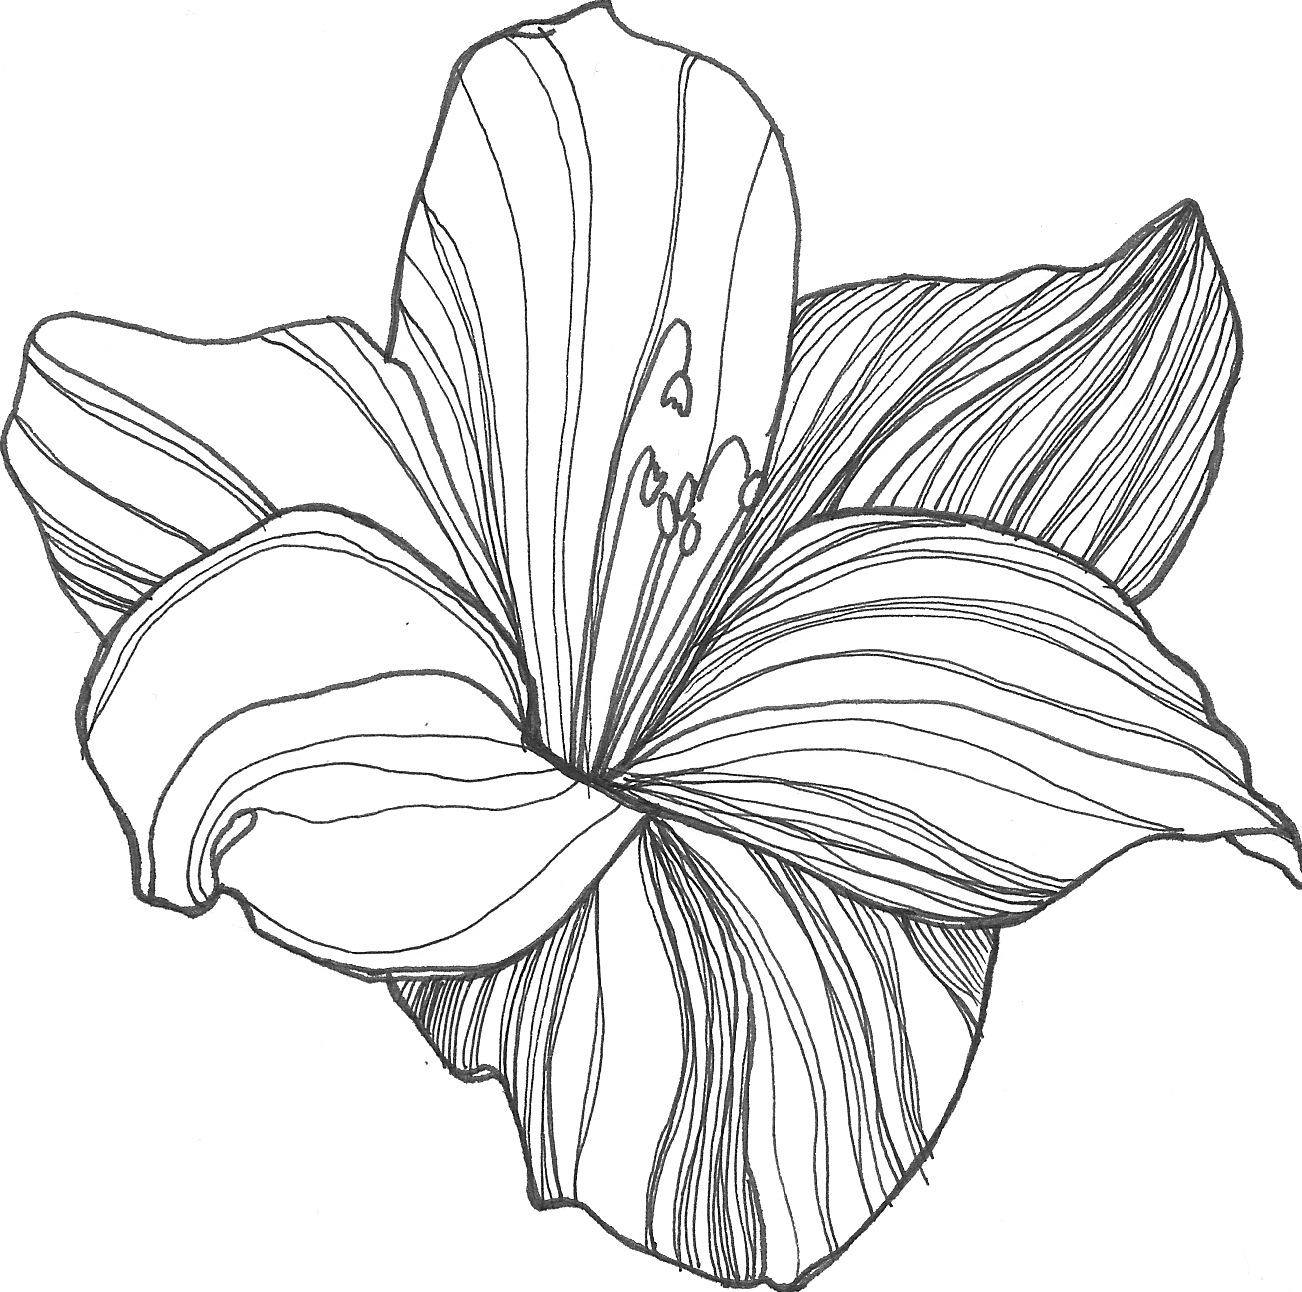 Best Flower Sketch Drawing with Realistic